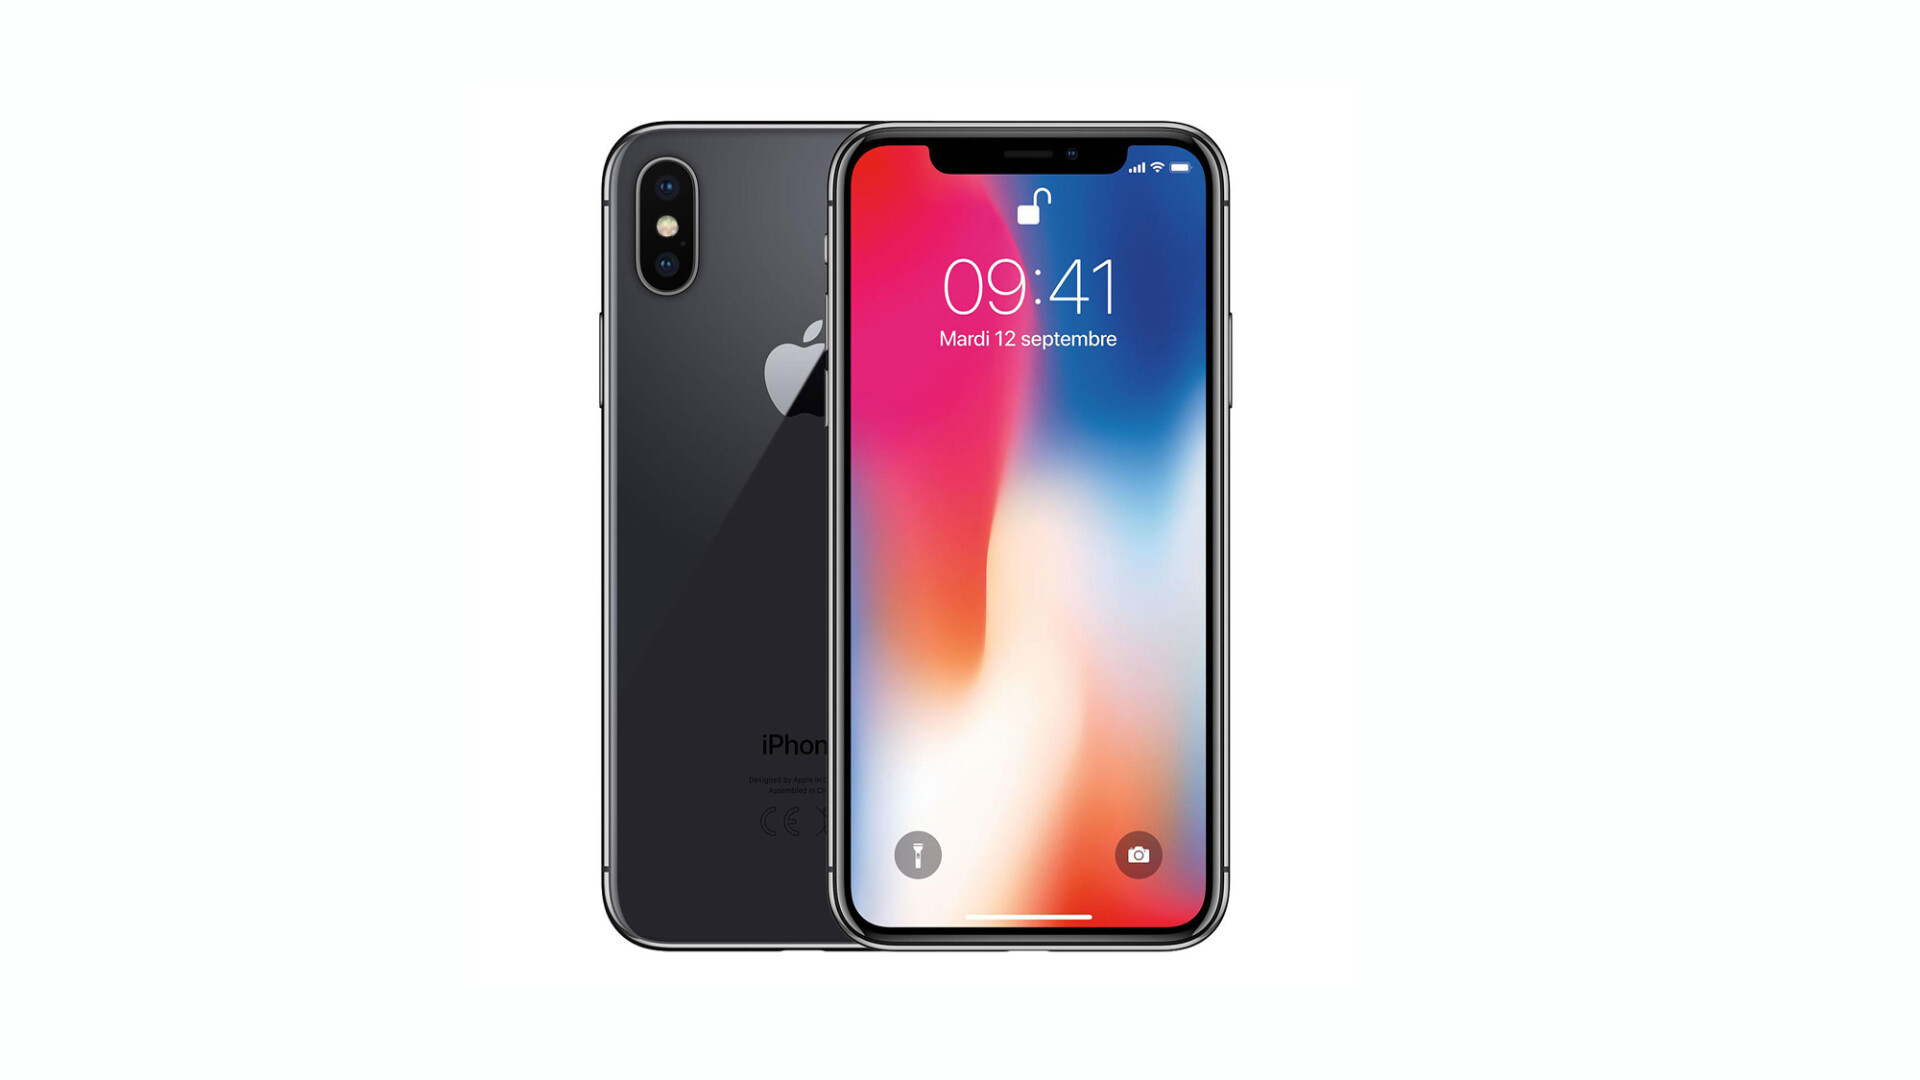 IPhone X 256GB - Space Gray 